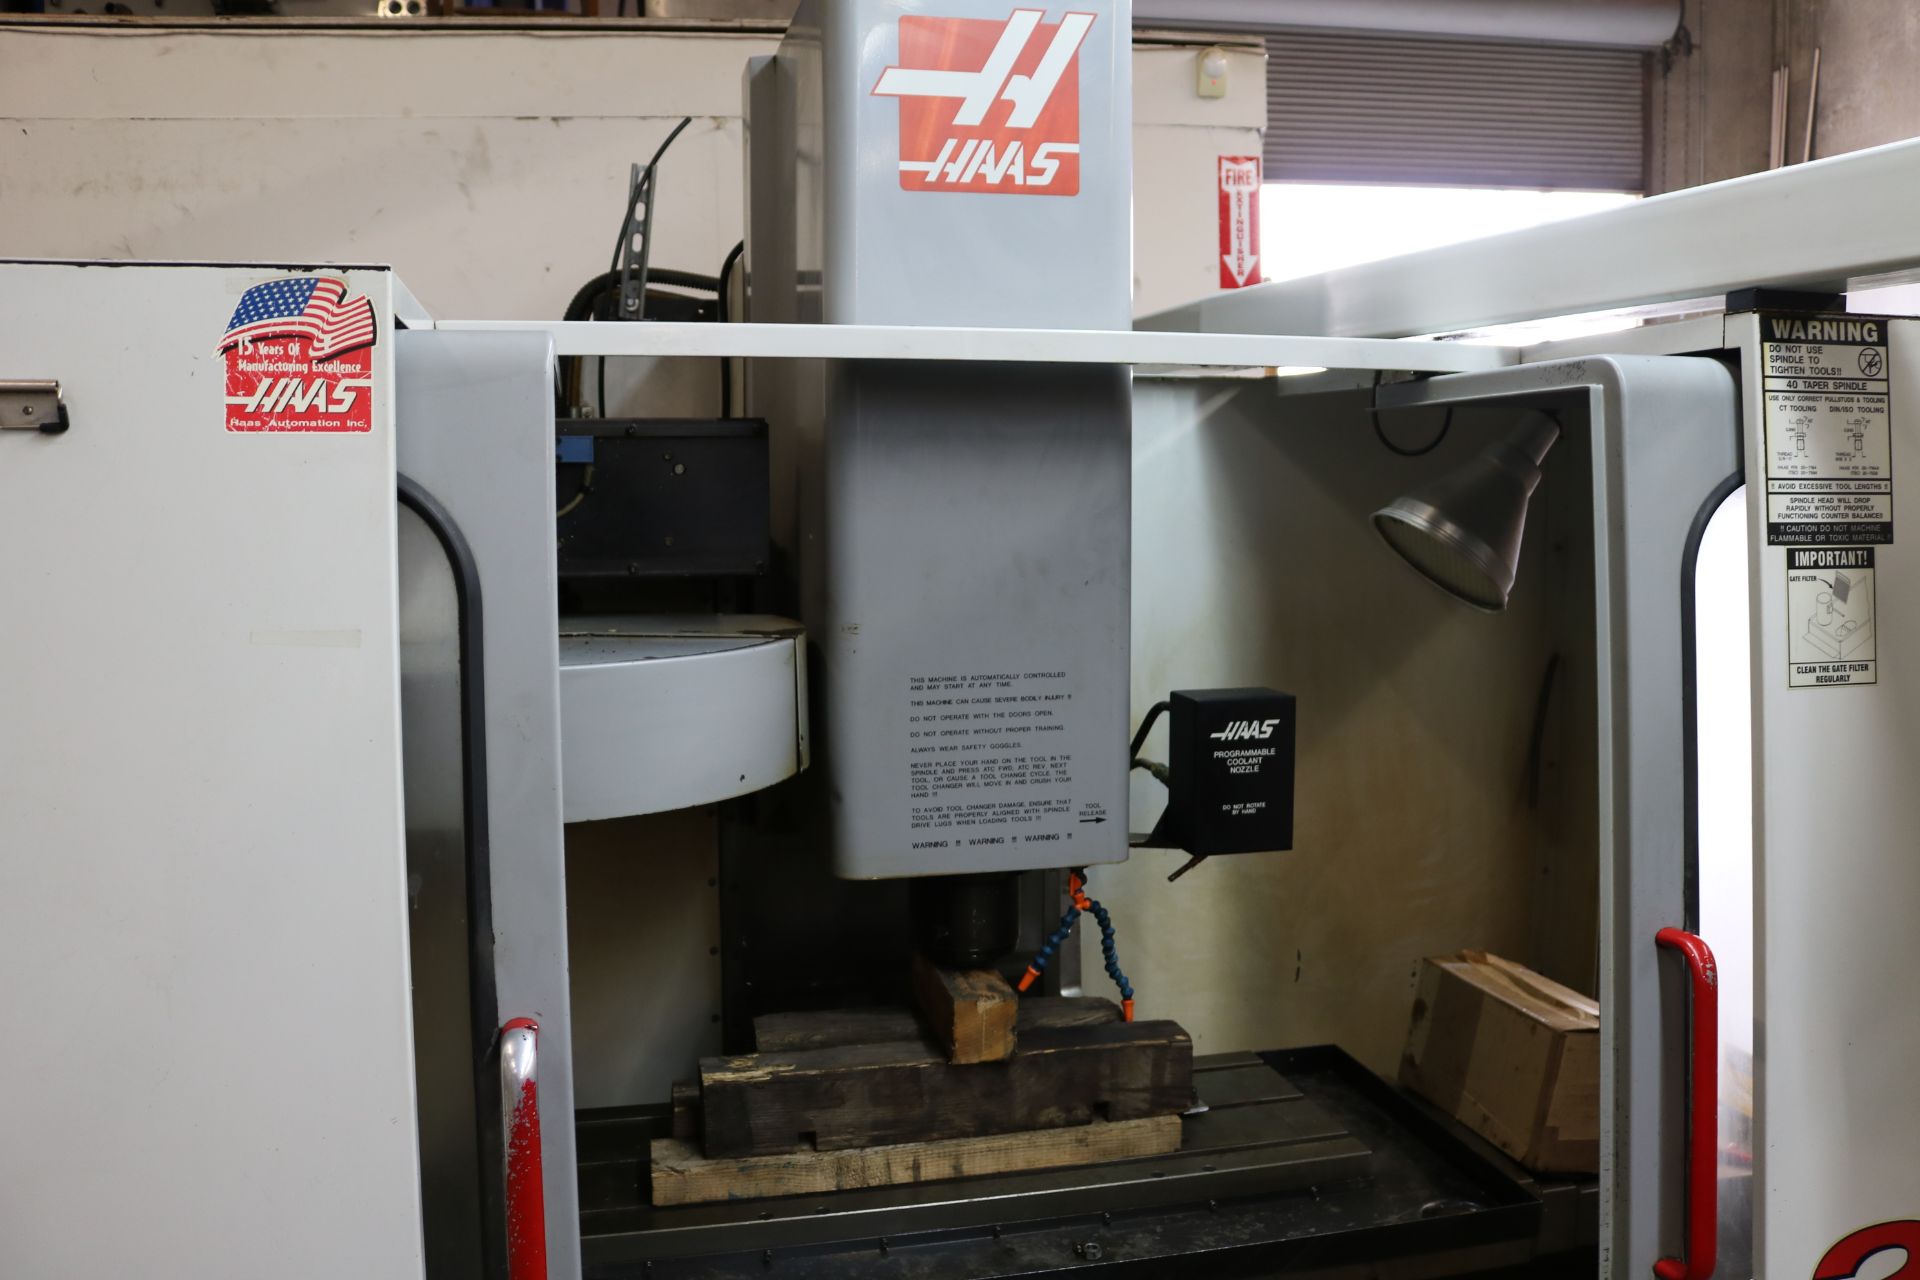 1999 HAAS VERTICAL MILL, MODEL VF-2, TRAVELS: 30" X 16" X 20", 36" X 14" TABLE, 10,000 RPM - Image 3 of 21